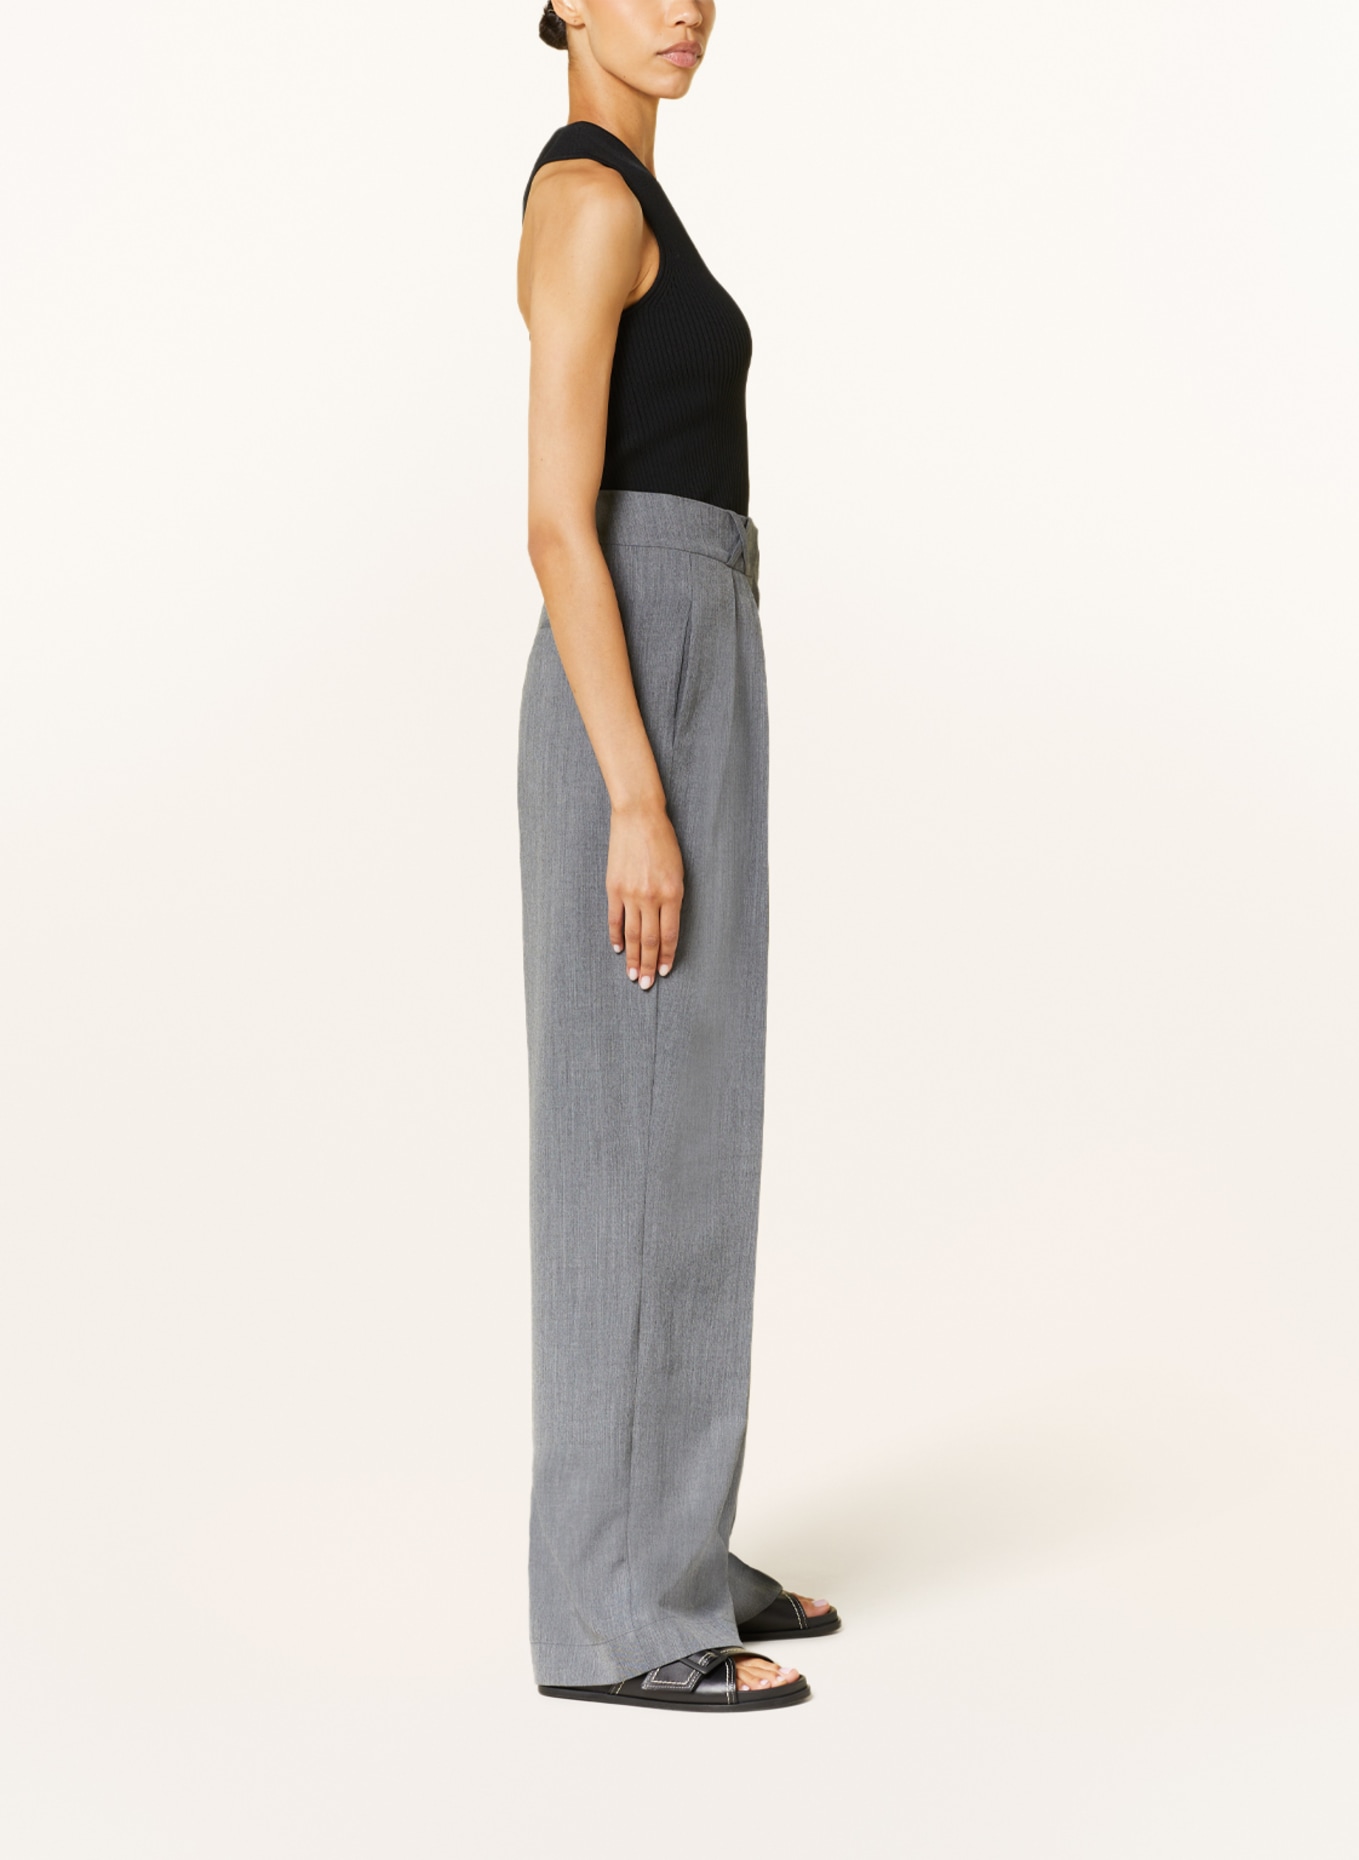 Róhe wide-leg tailored trousers - Grey